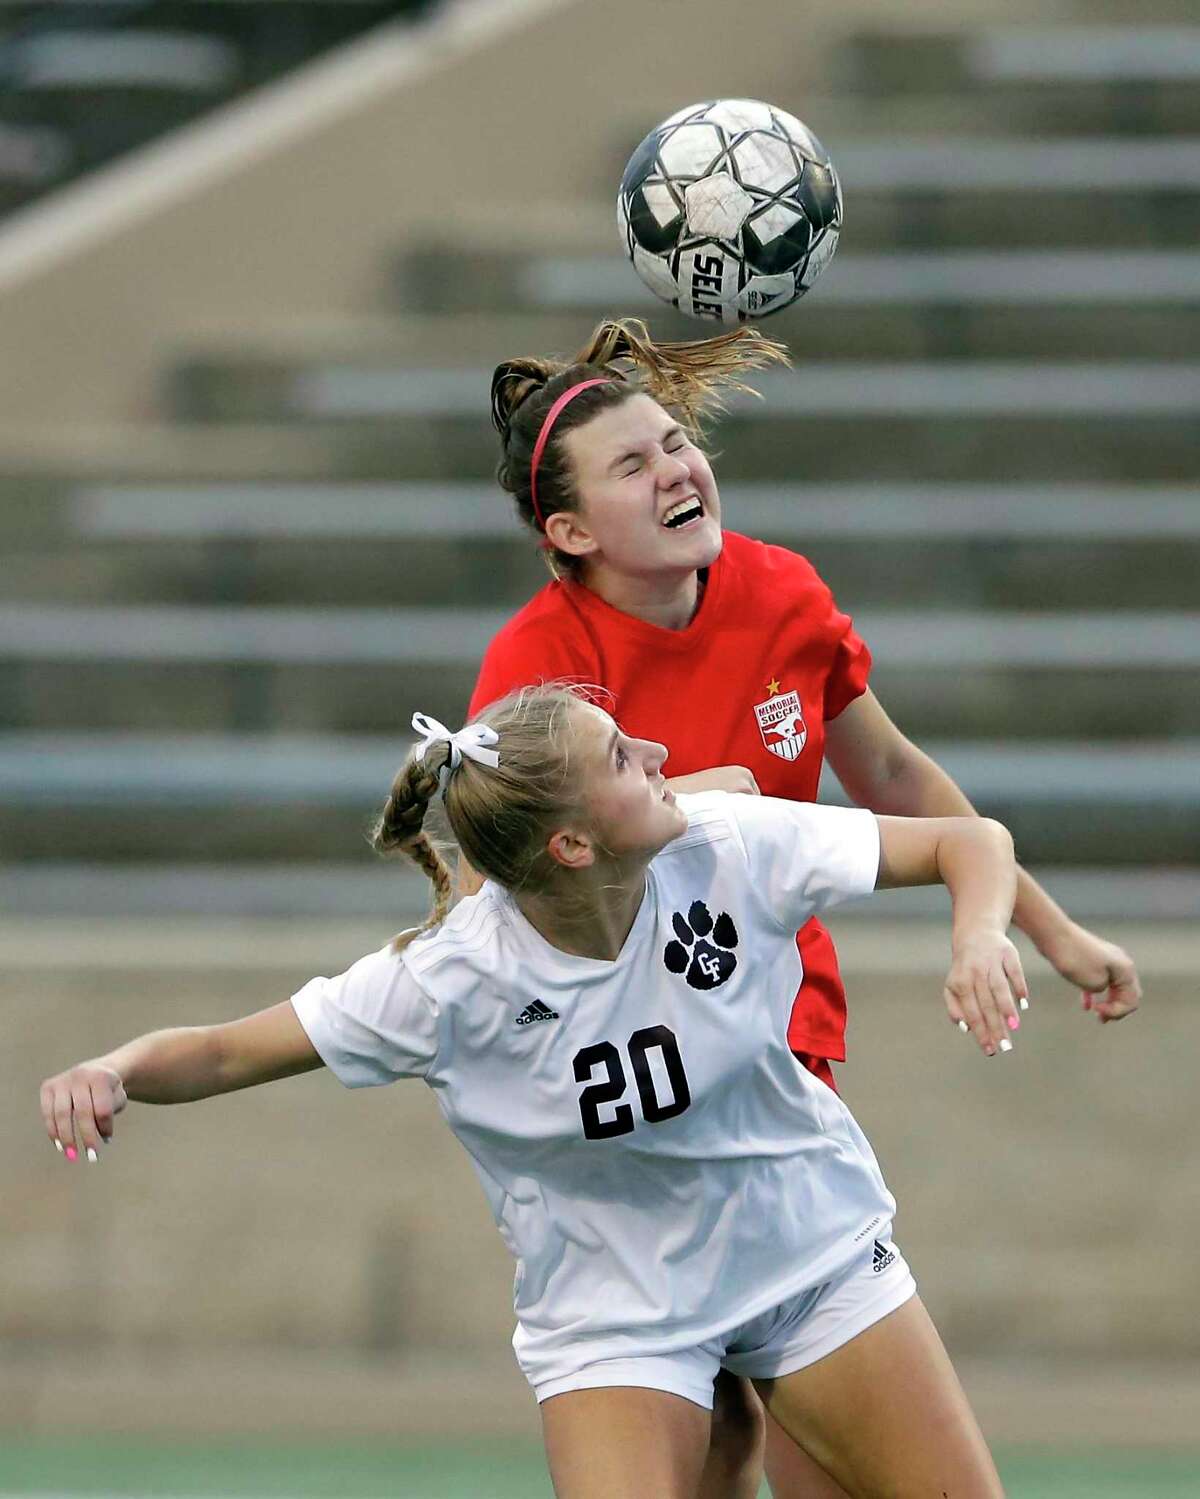 Memorial’s Cara Chaffin, back, wins a header over Cy-Fair’s Ava Drouin (20) during the second half of their Region 3 championship soccer game Friday, Apr. 9, 2021 at Tully Stadium in Houston, TX.